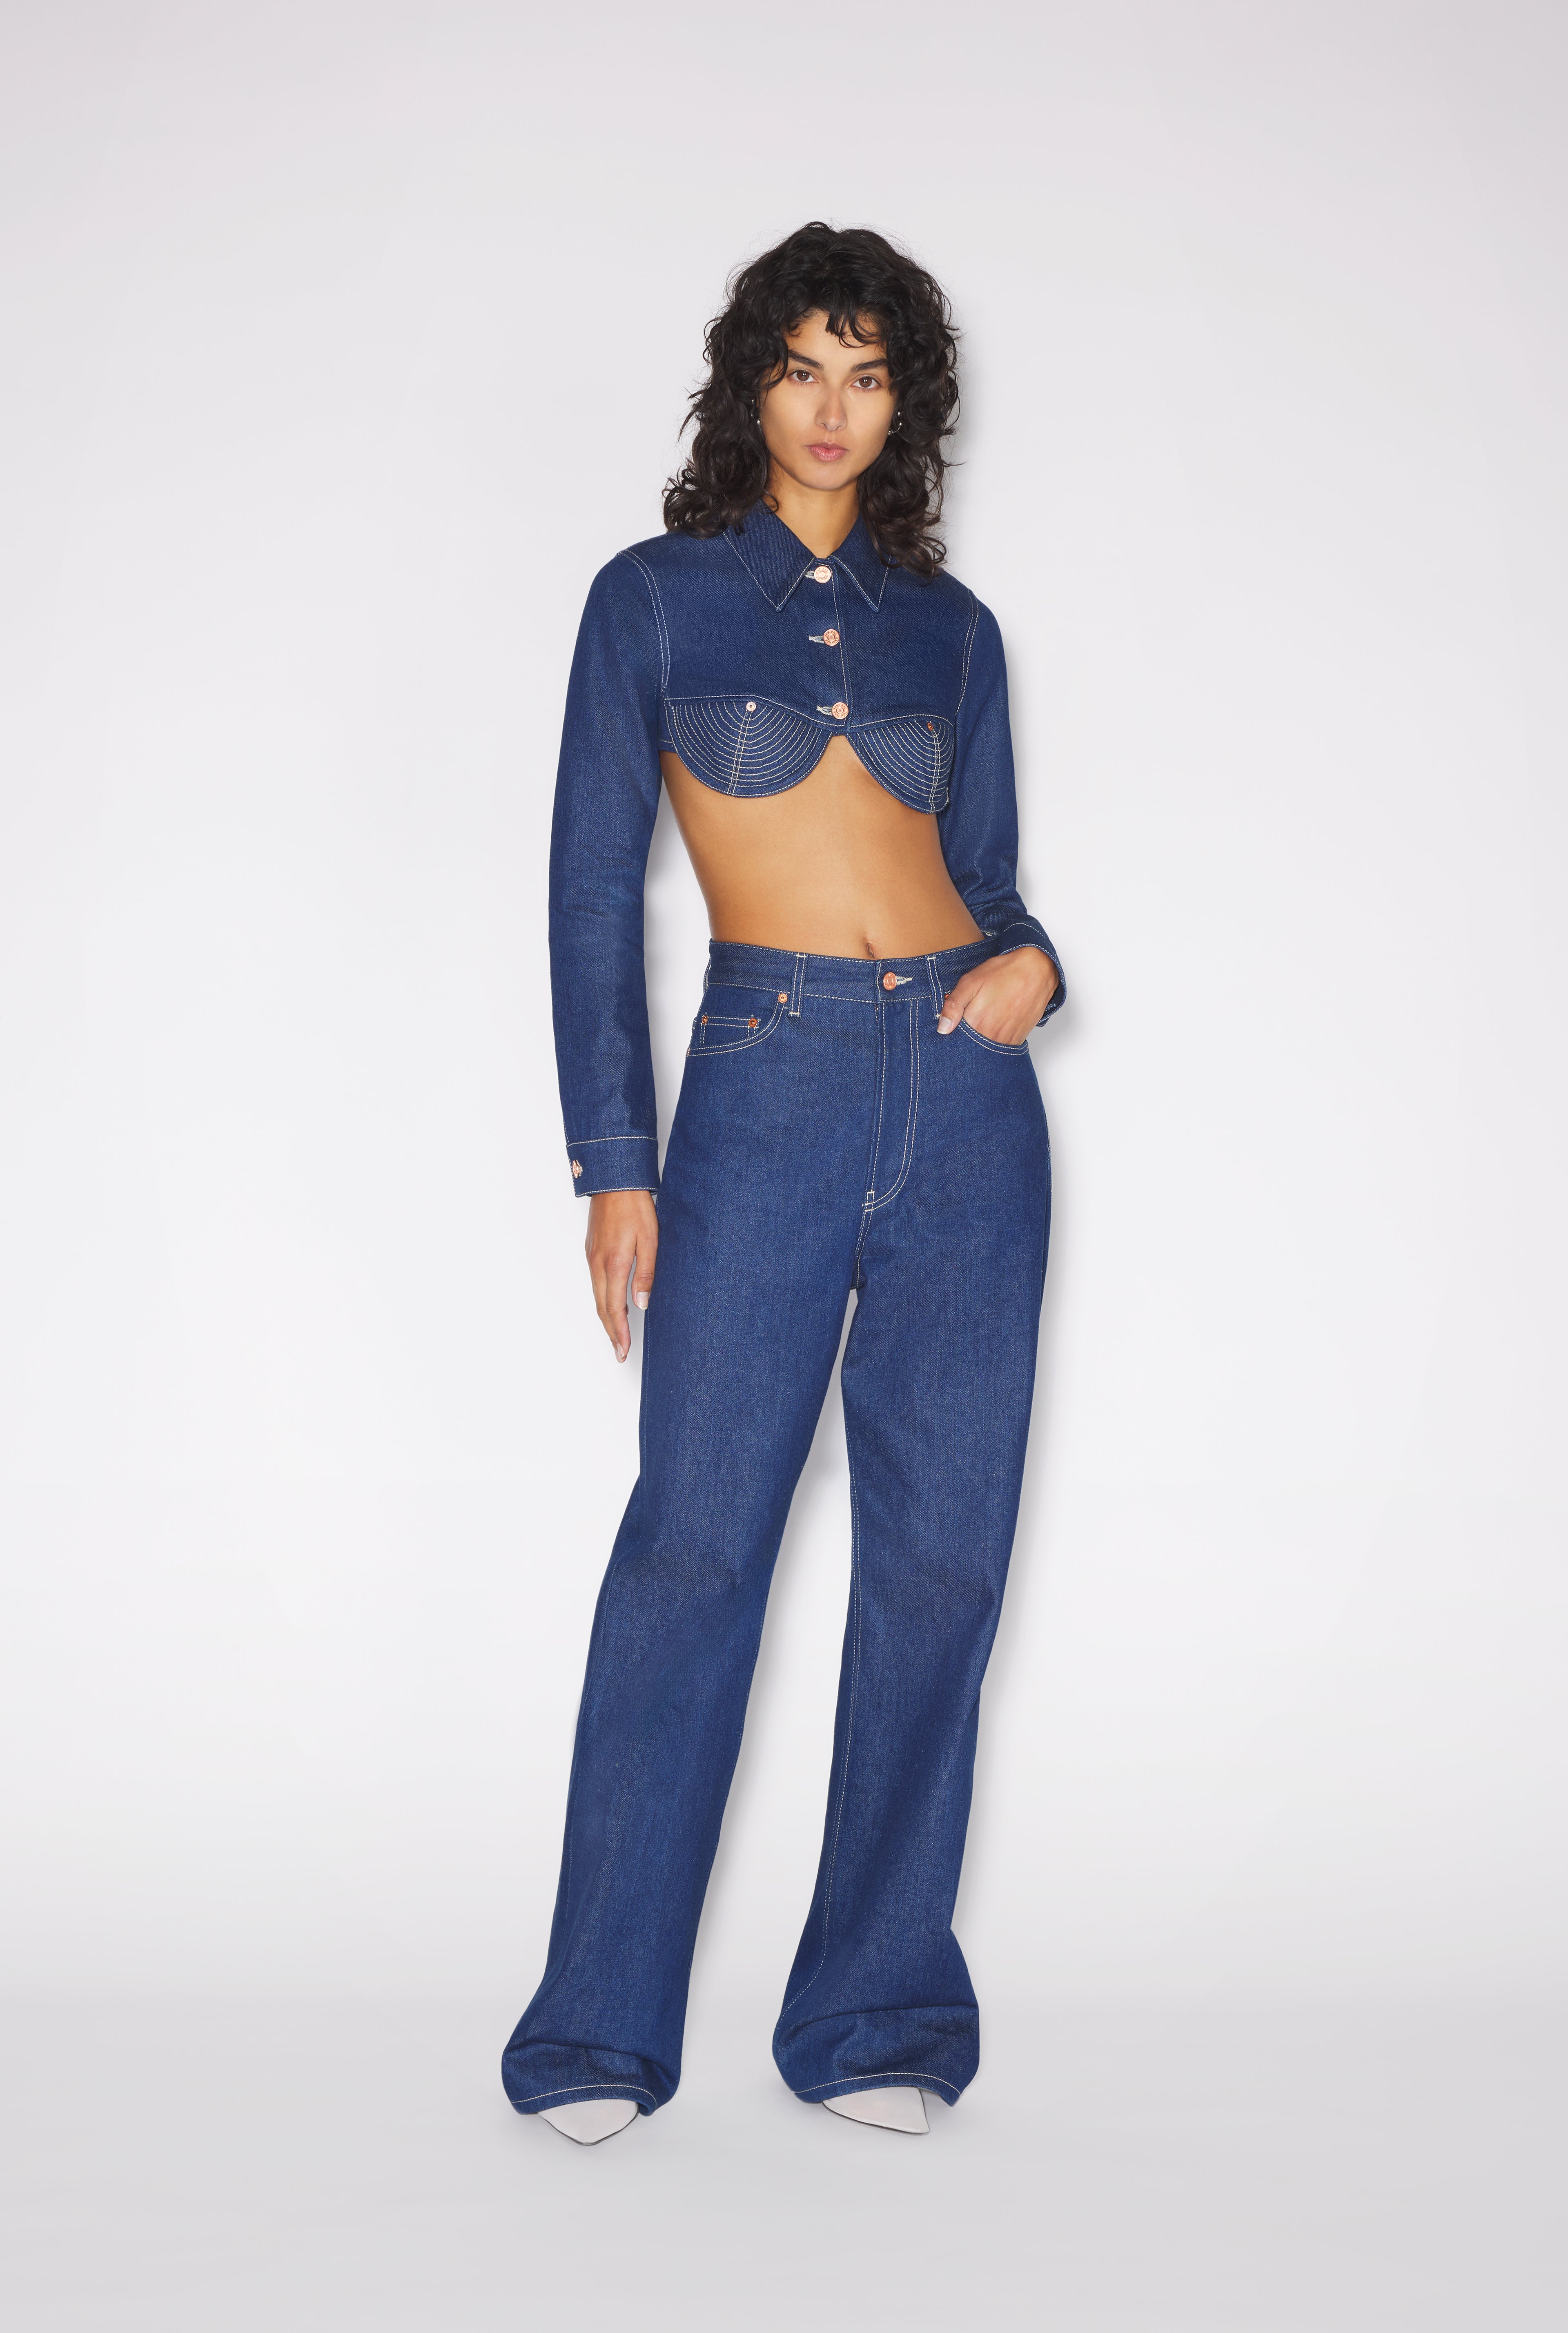 The Cropped Conical Denim Jacket